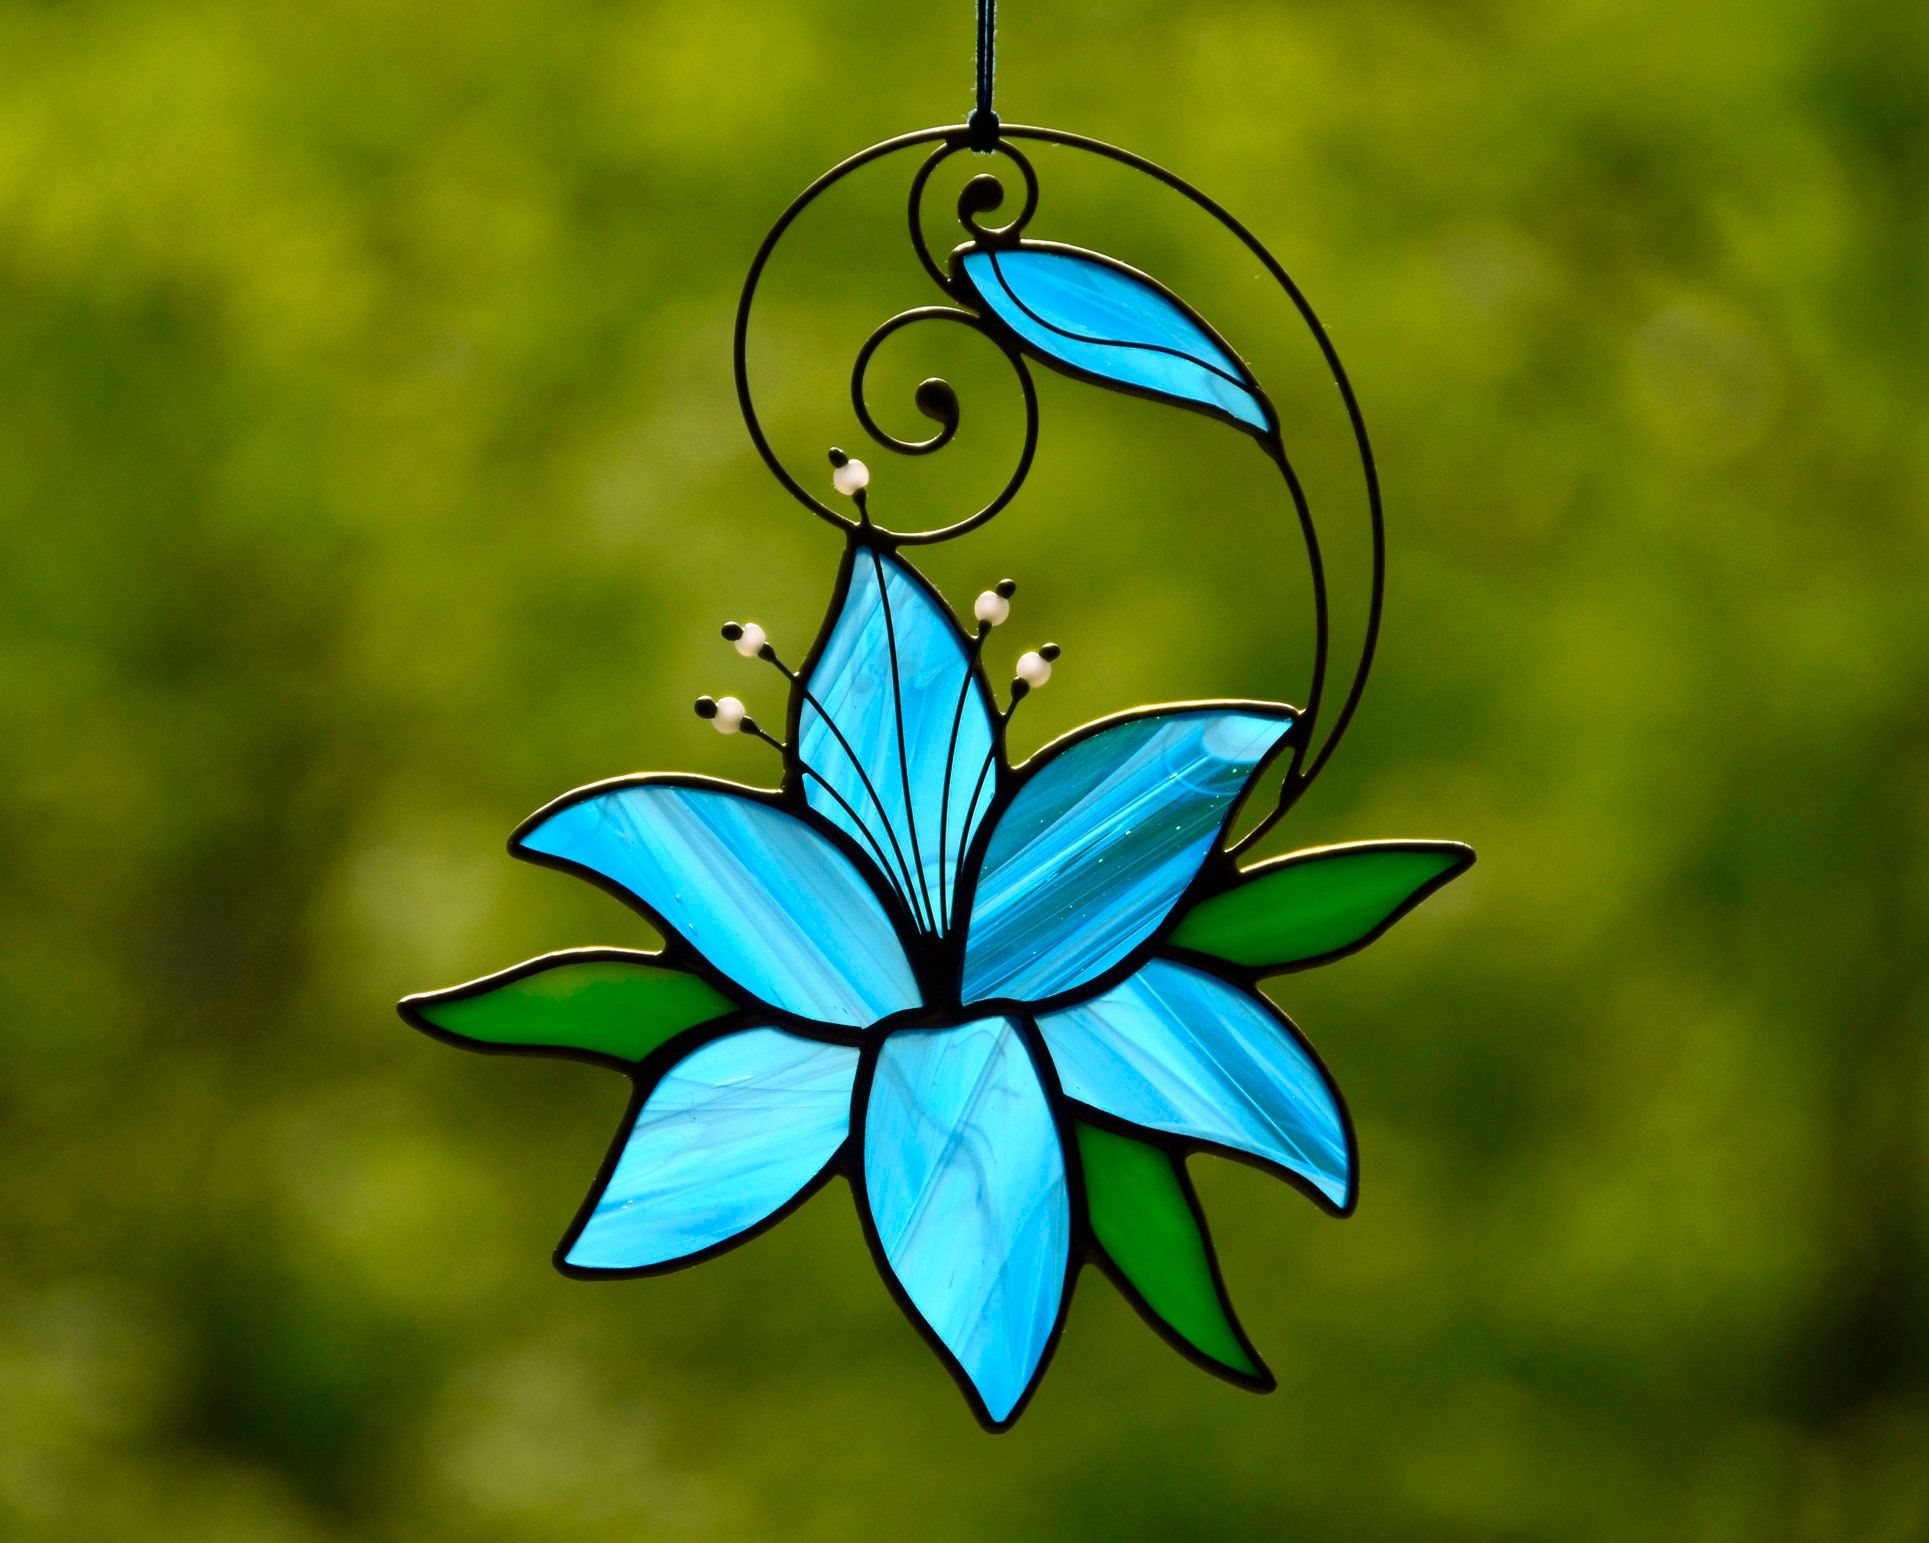 Stained glass lily suncatcher garden ornament windows hangings decoration 